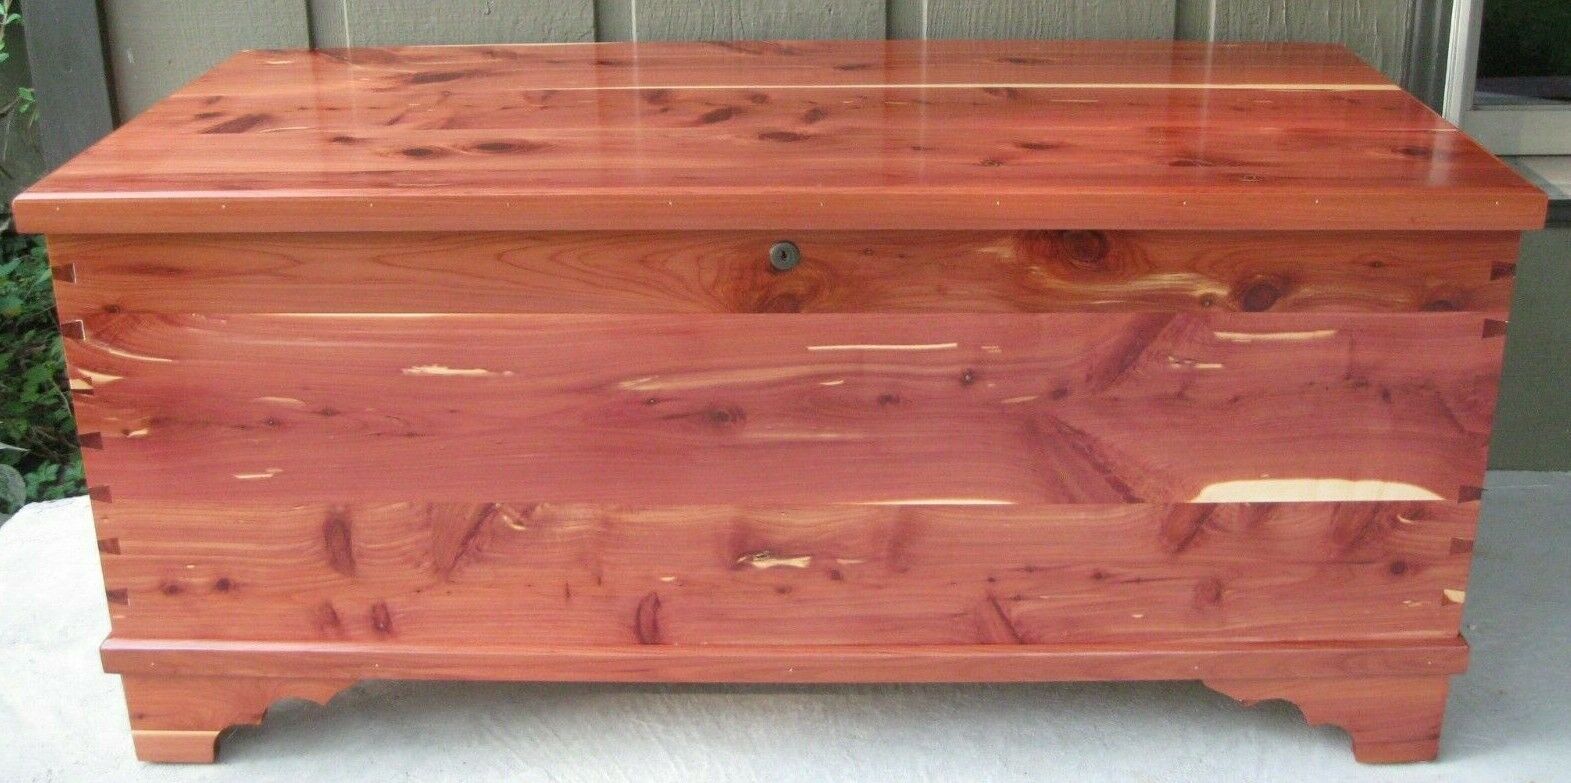 Hope Blanket Cedar Chest Kit Do-it-yourself Woodworking Flattop Dovetail Joints